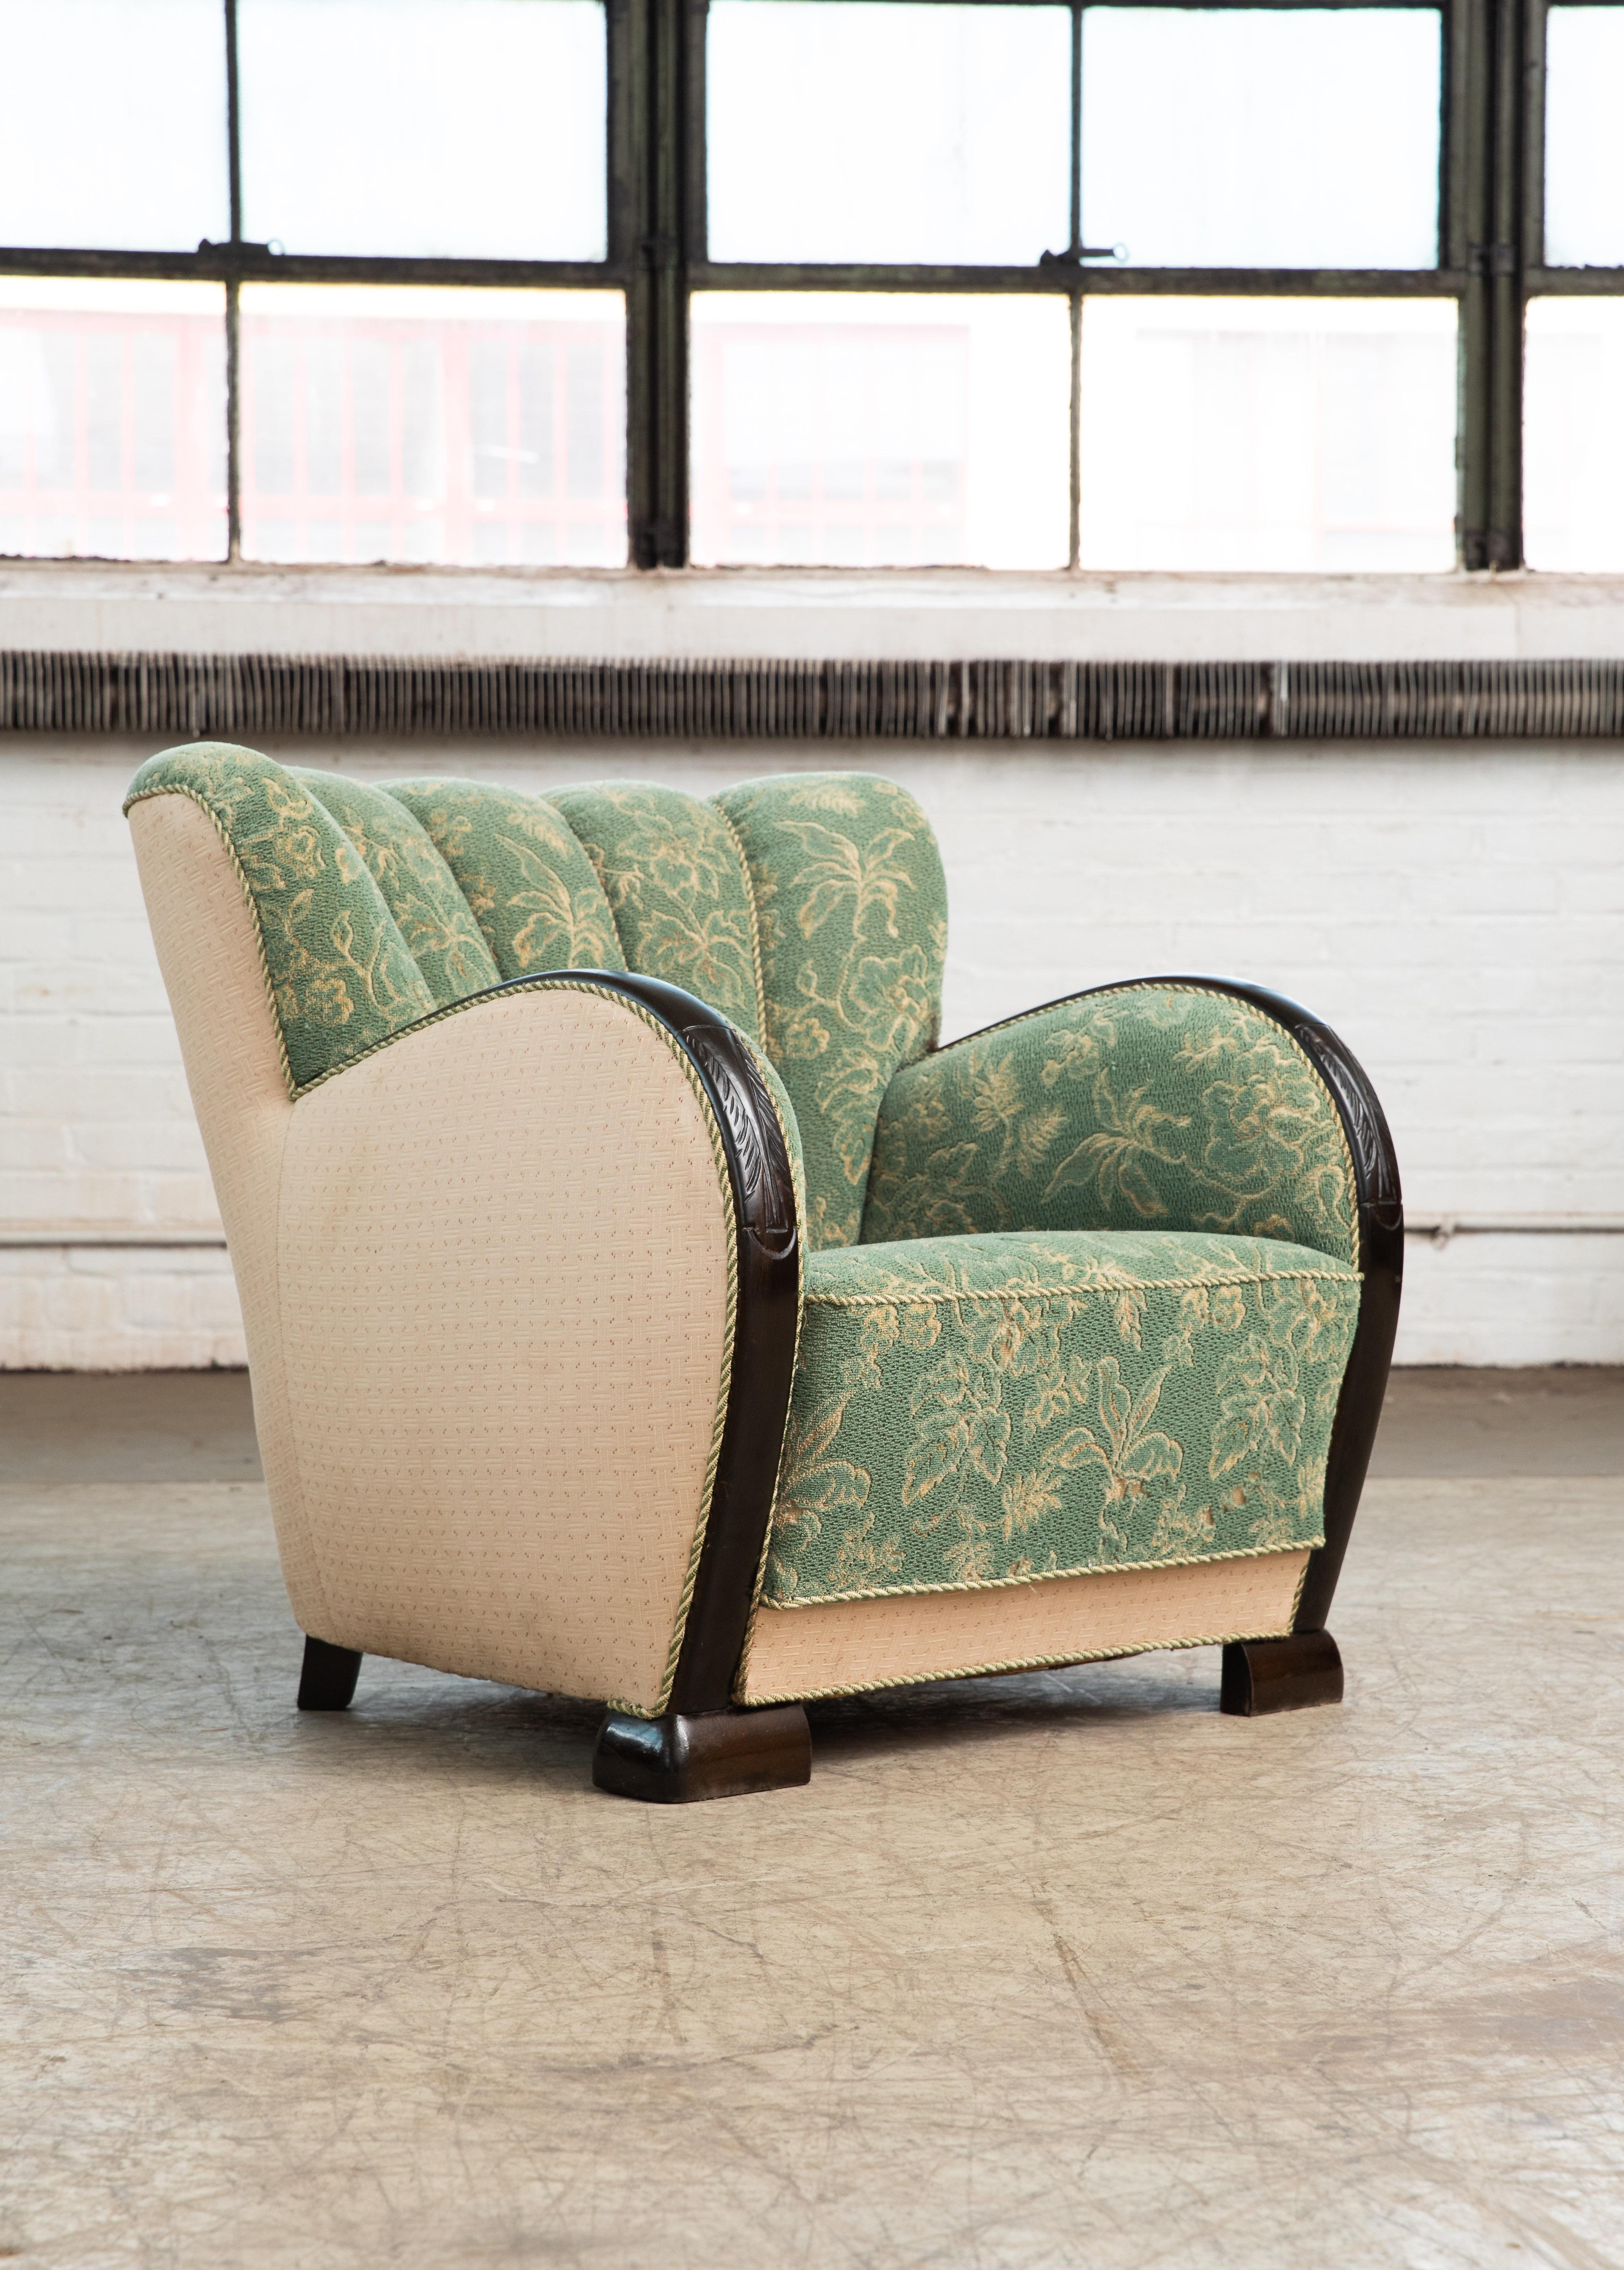 Exuberant, curvy and very eye-catching Danish club chair from the 1930s or 1940s. Set on beech feet typical of the period and with a channeled back reminiscent of sports car seats of the era. Sturdy and sound construction with frame and legs made